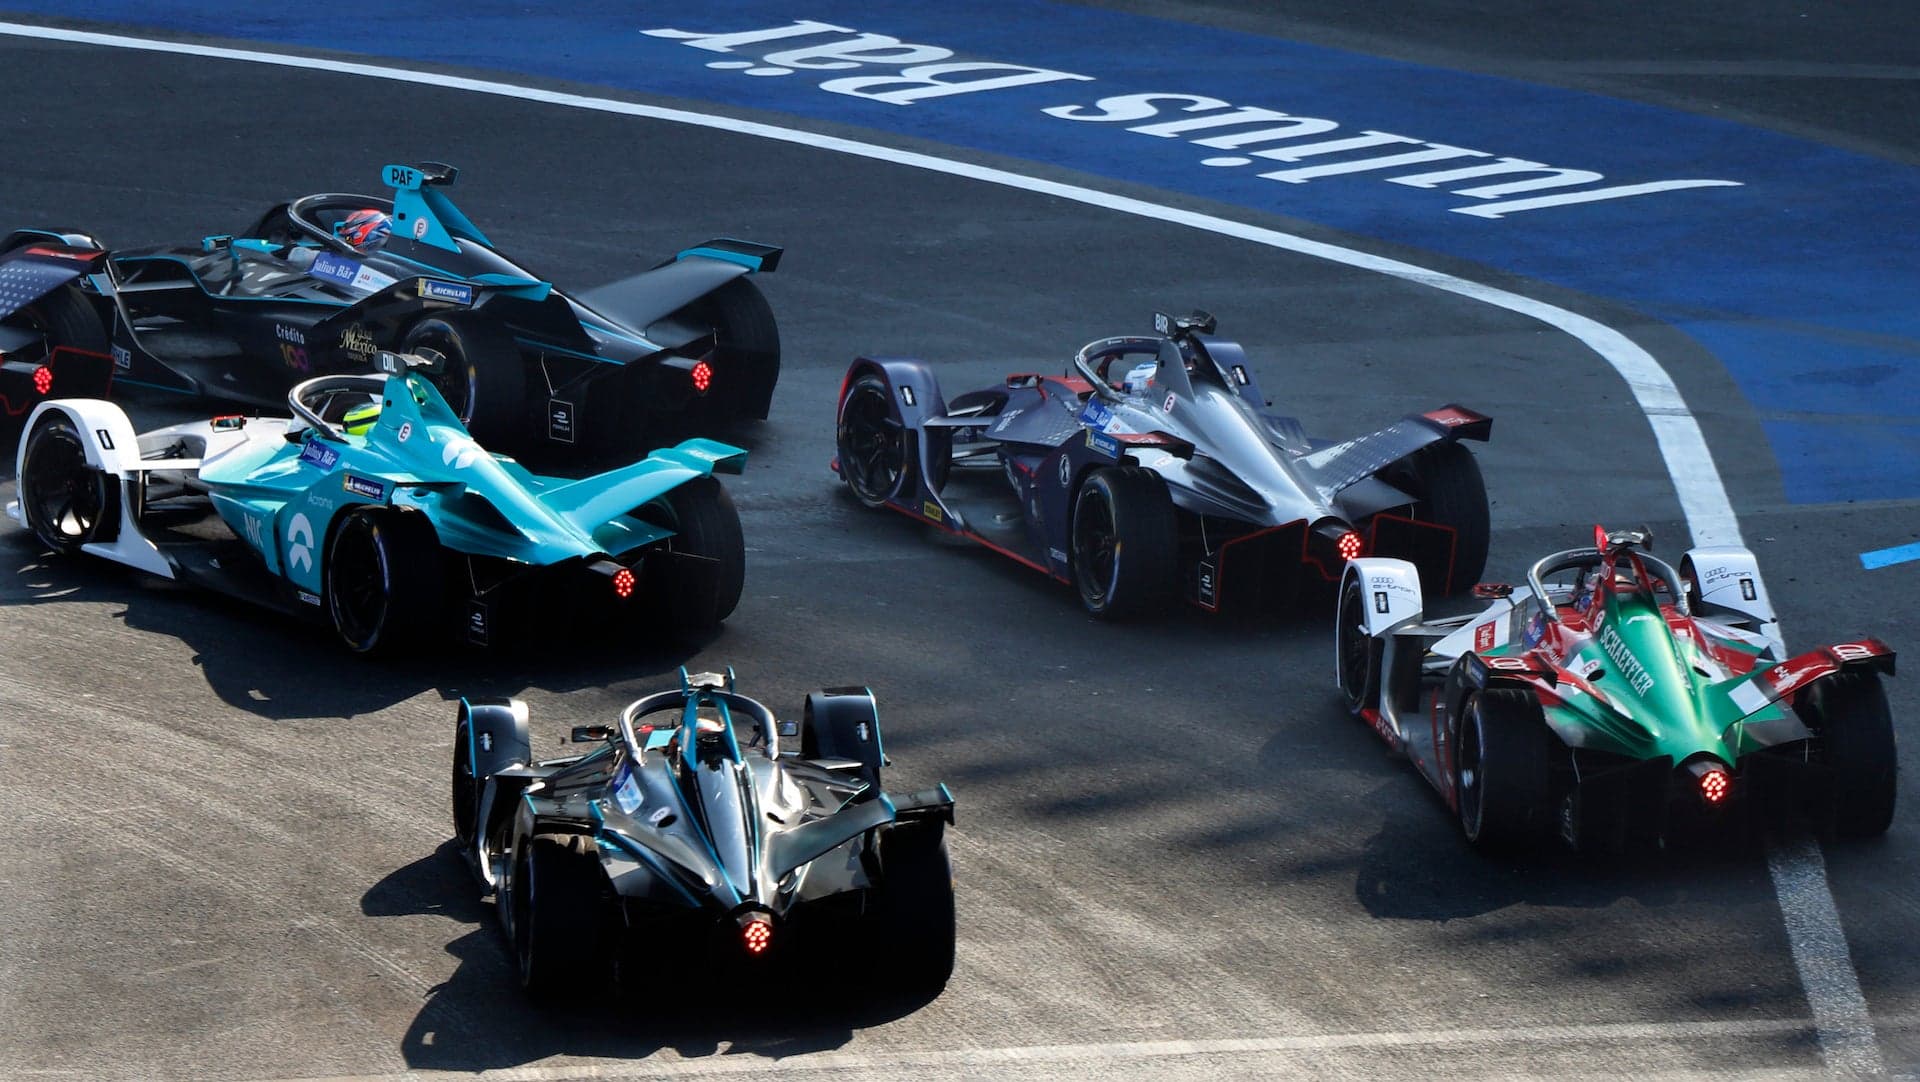 McLaren May Be Next to Jump Into Formula E. What Does It Have to Gain?